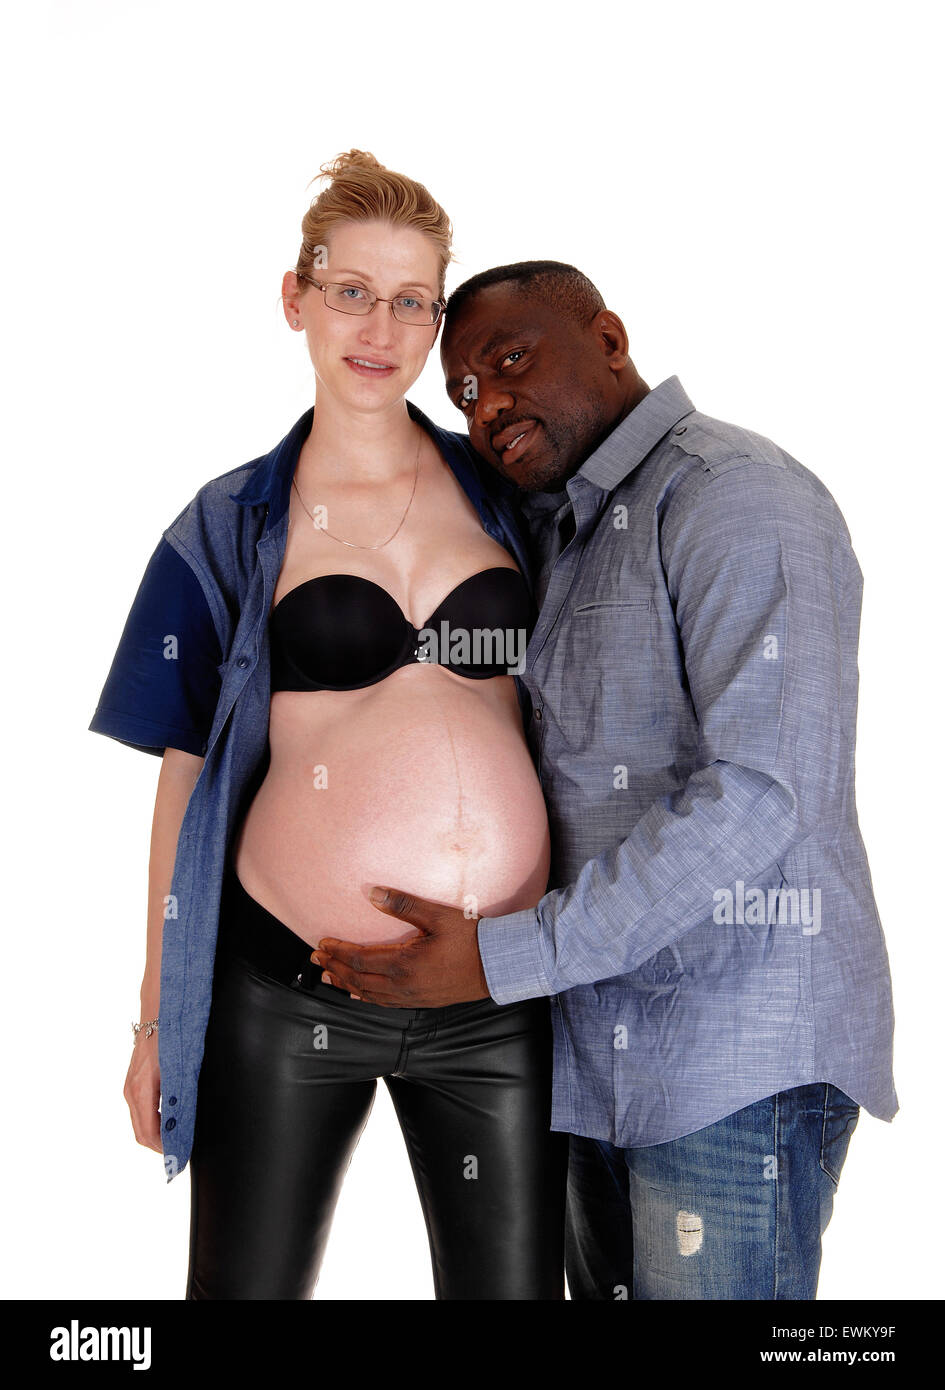 Wife pregnant by black image